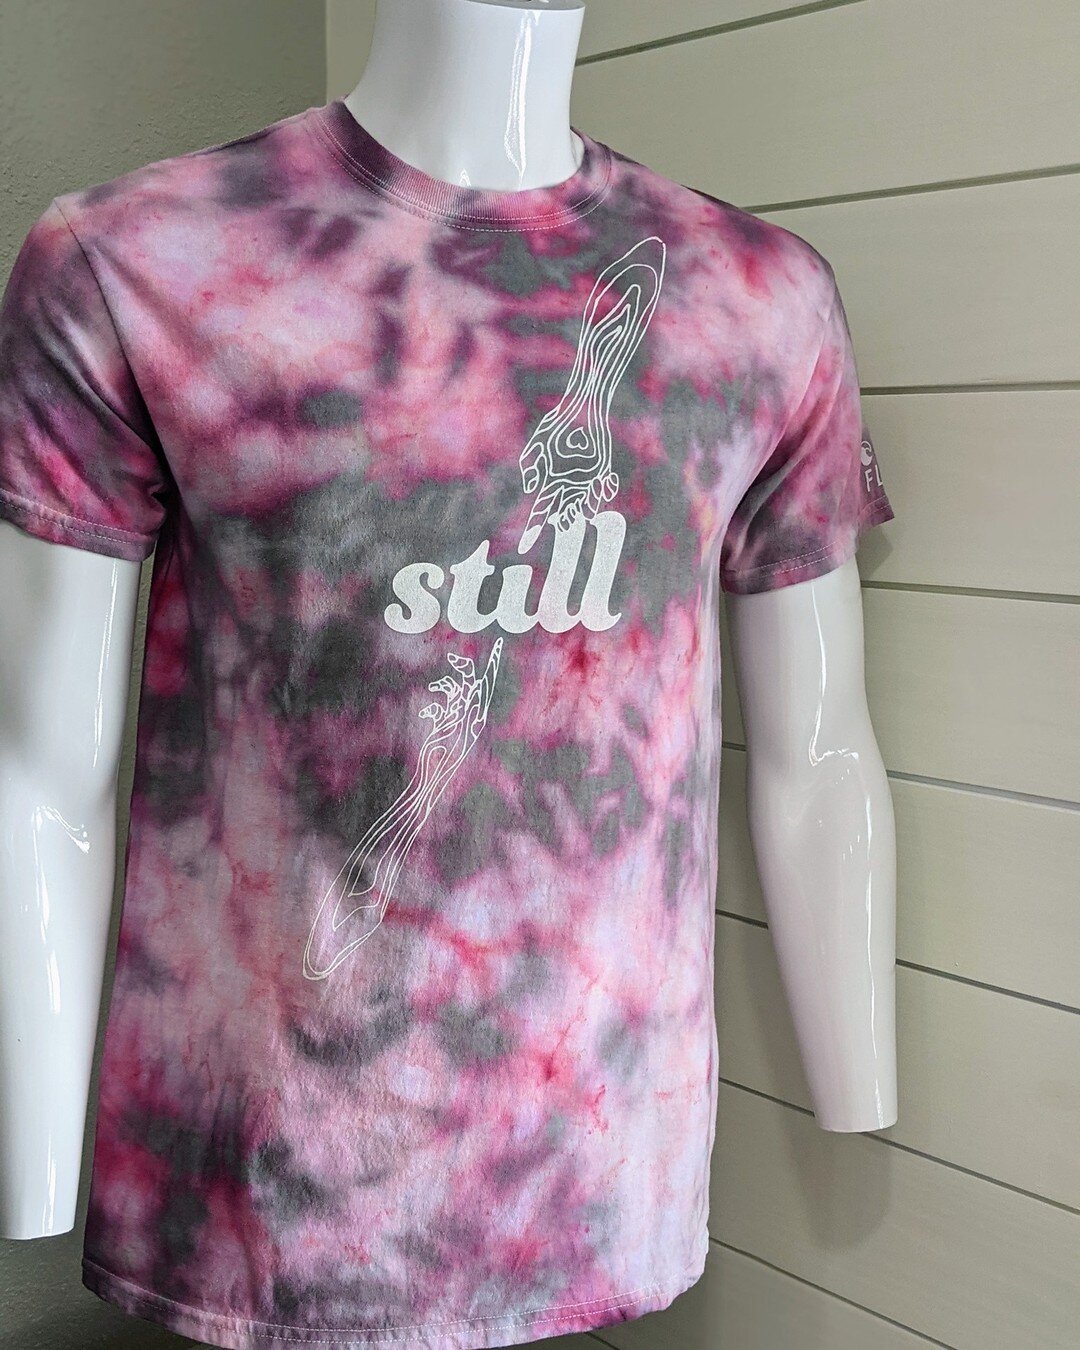 Did you know that you can customize the tie dye shirts on the clearance page by adding an Overflow design? 
Look how this cool this one with the Still design is 🤩
Make sure to grab yours before they're gone!
.
.
.
.
#OVRFLW #OverflowApparel #Carefor